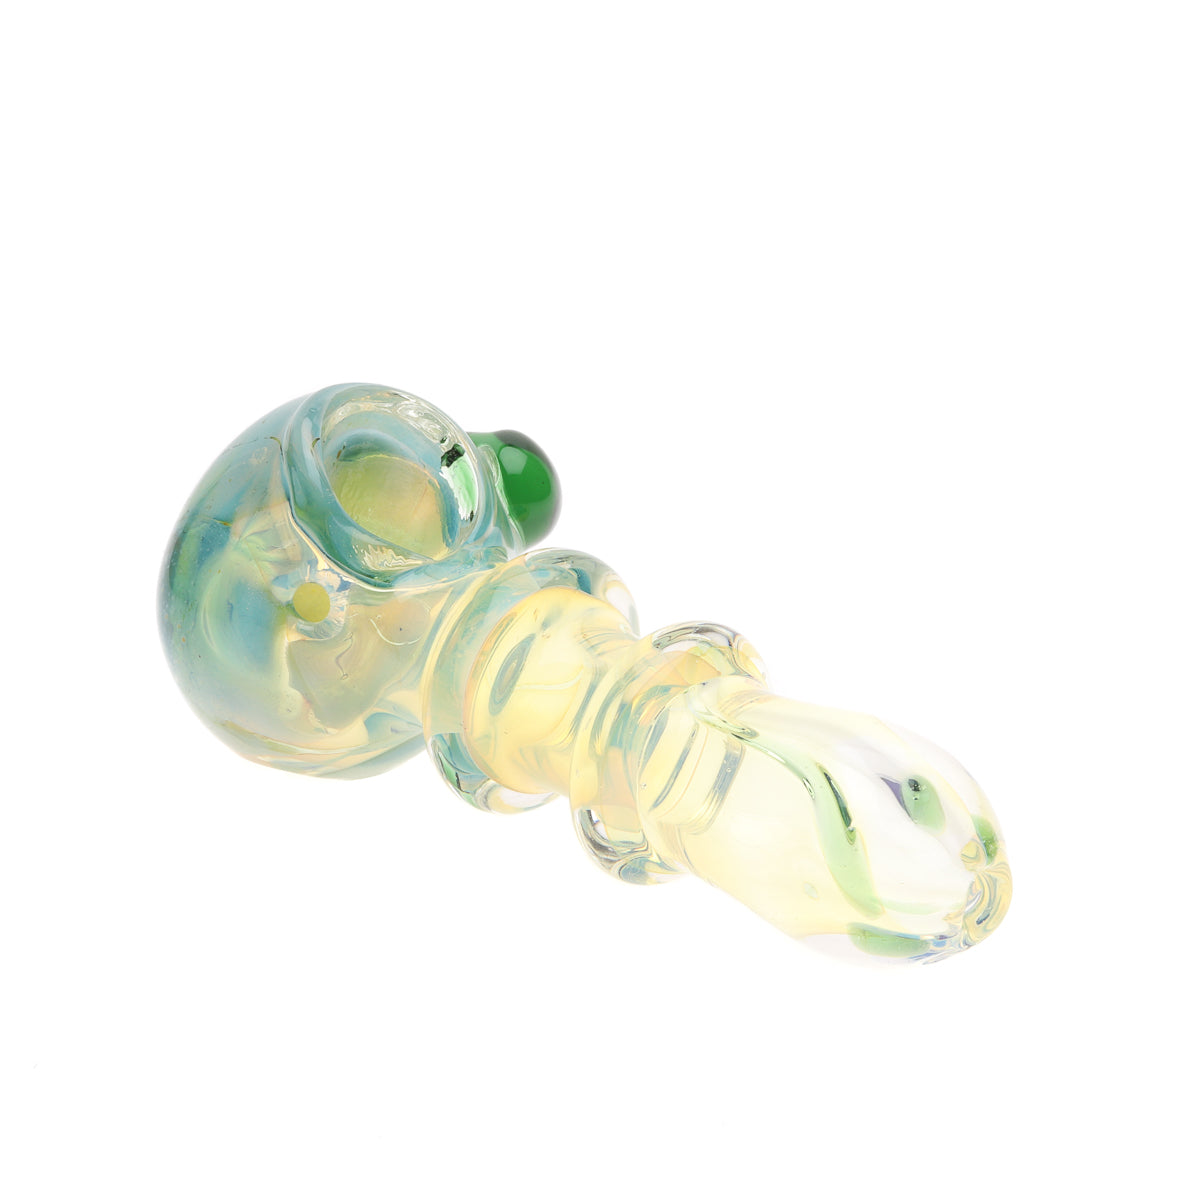 Fumed Green Illusion Glass Pipe